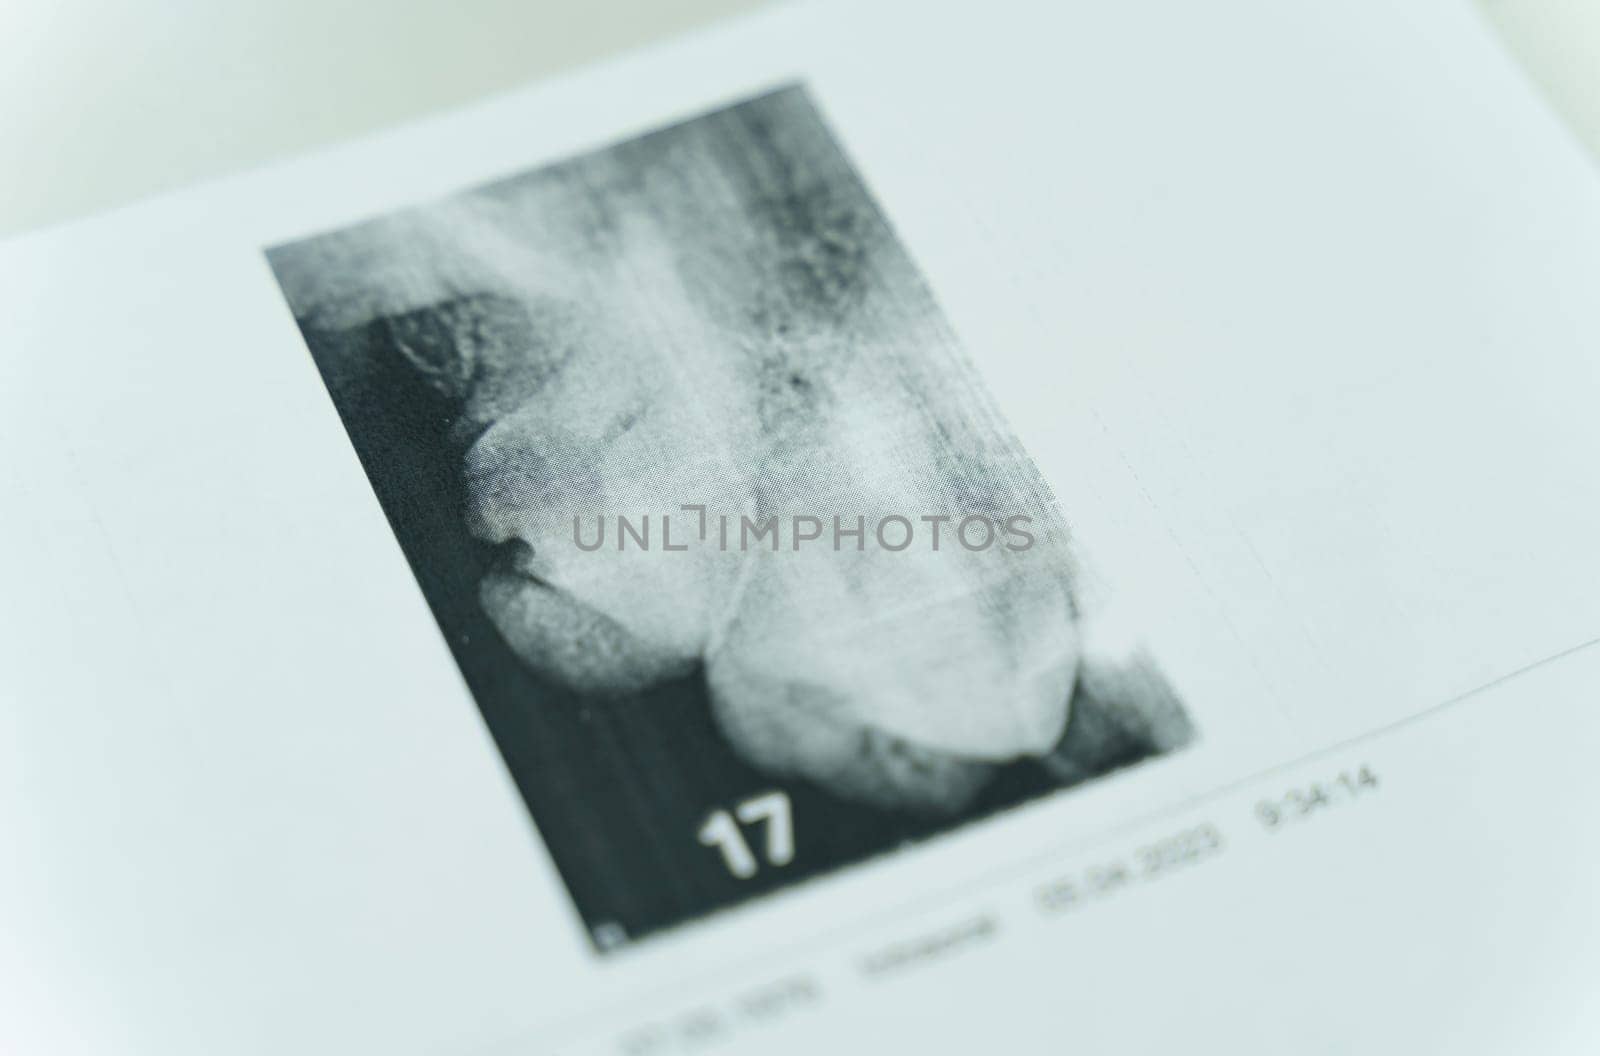 On the table is a close-up printout of two teeth.